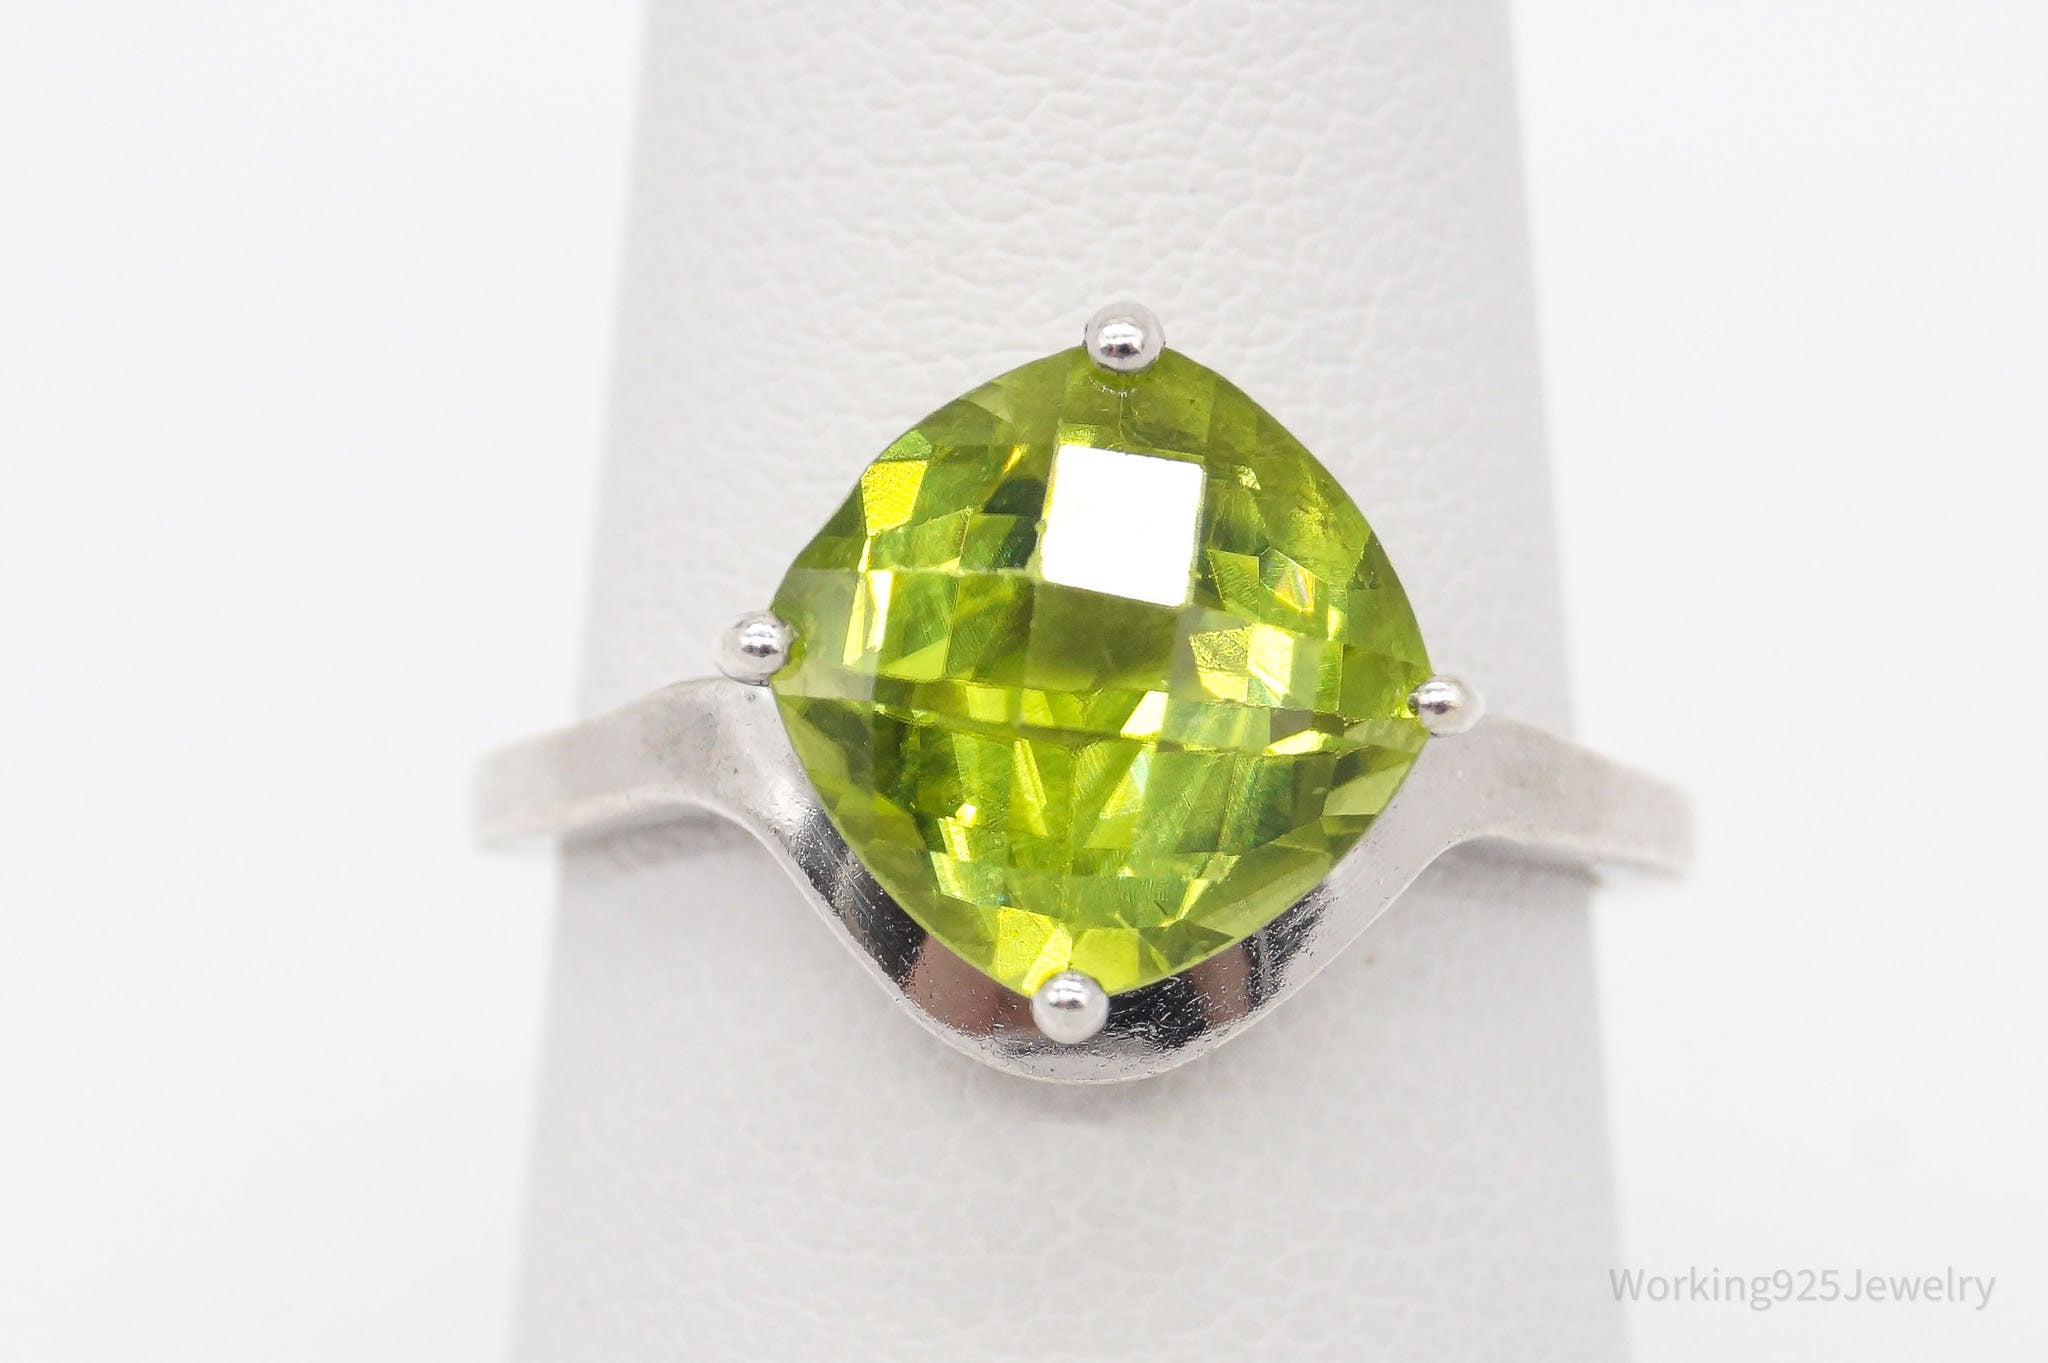 Vintage Peridot Sterling Silver Ring - Size 6.75